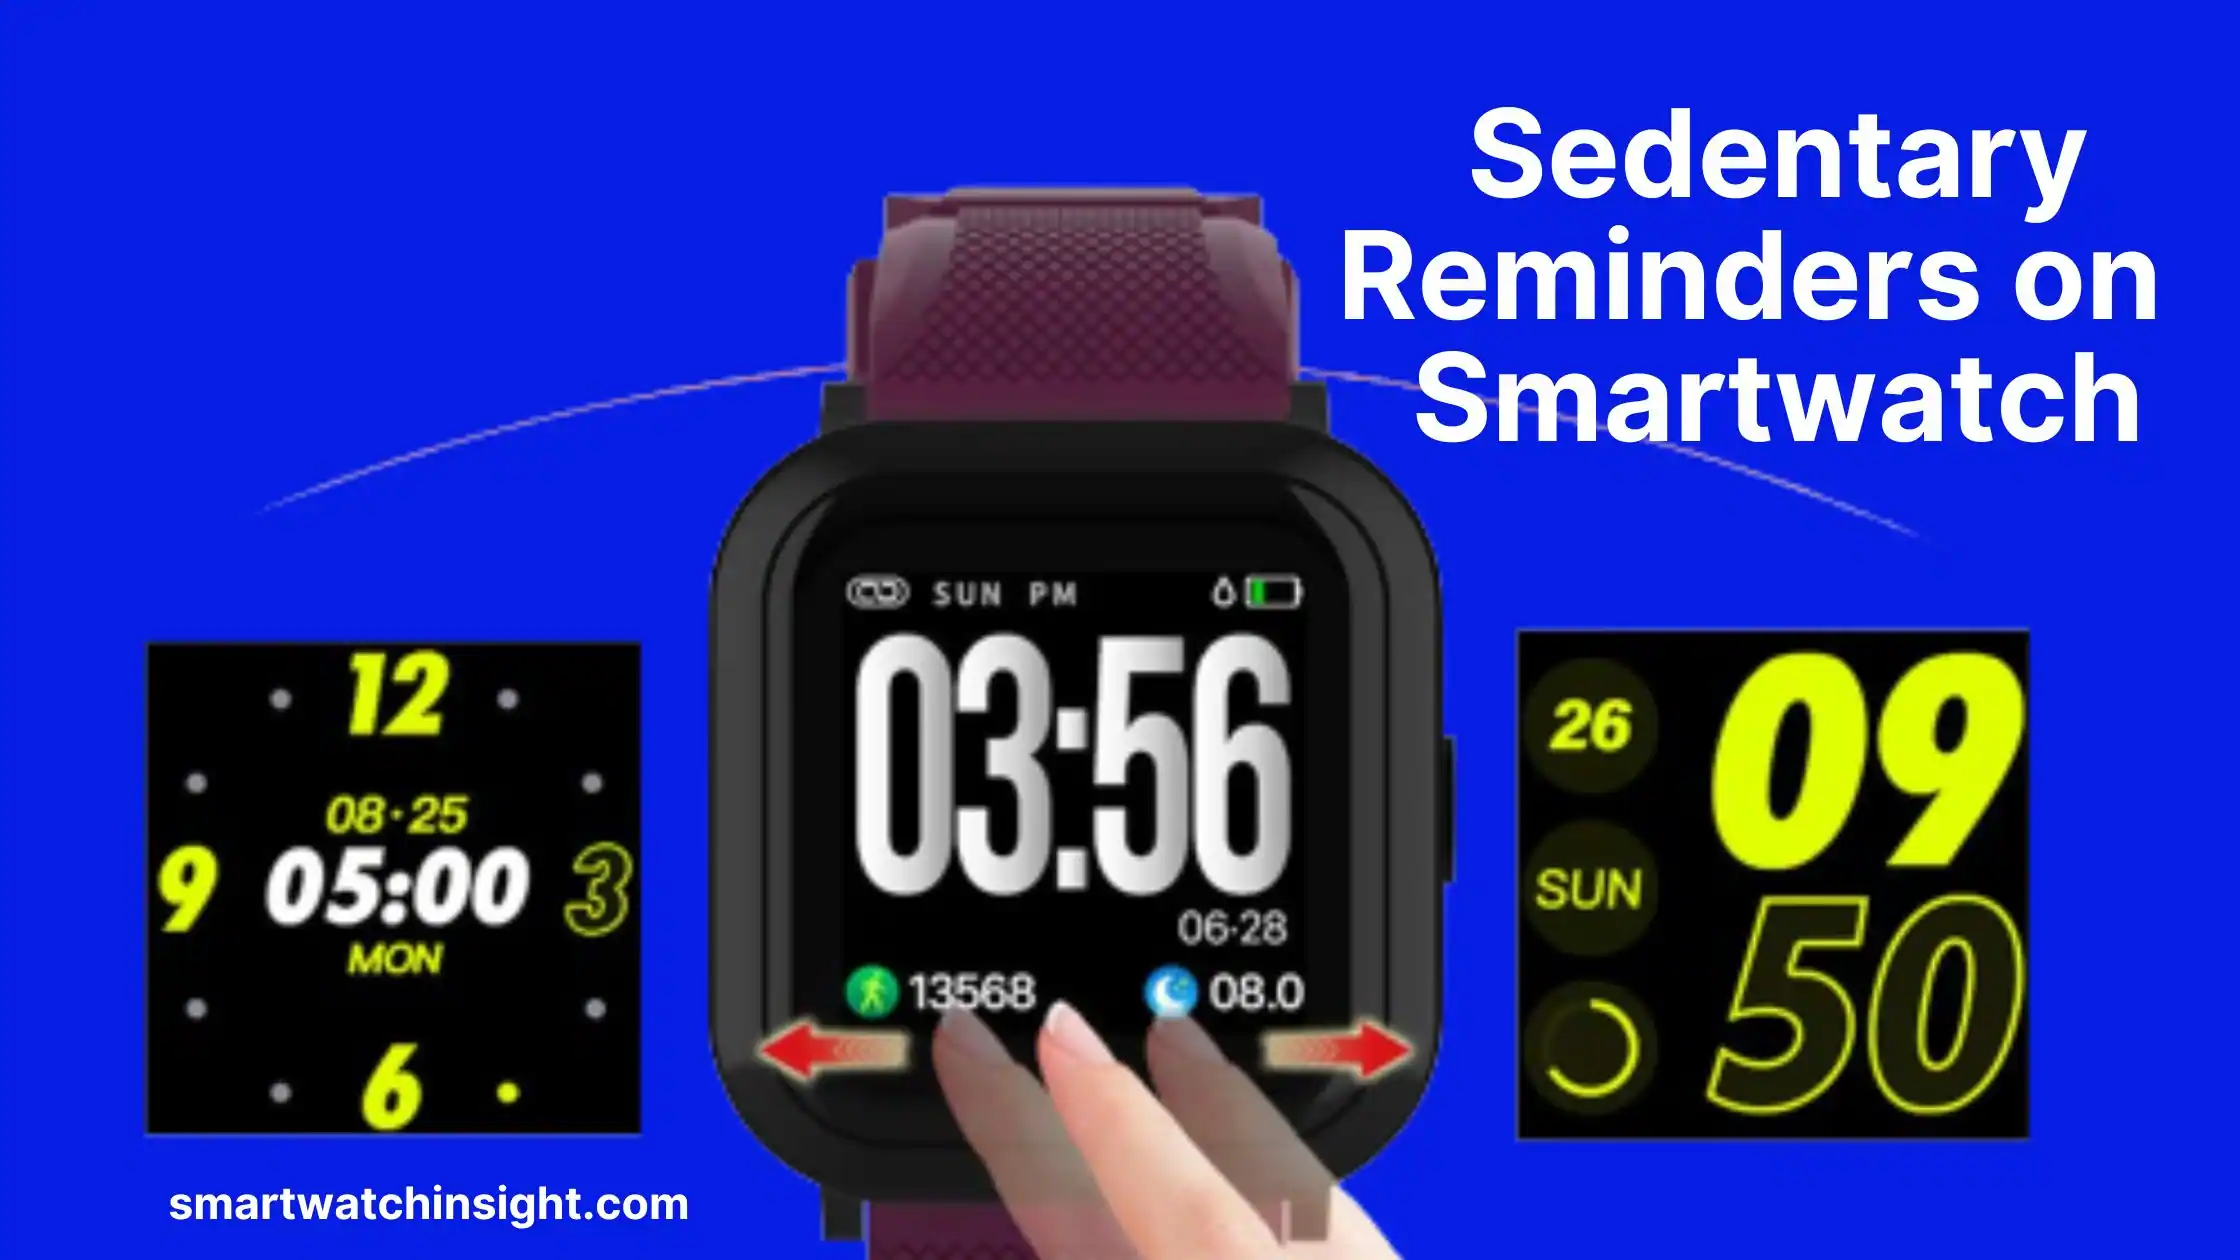 Benefits of Sedentary Reminders on a Smartwatch